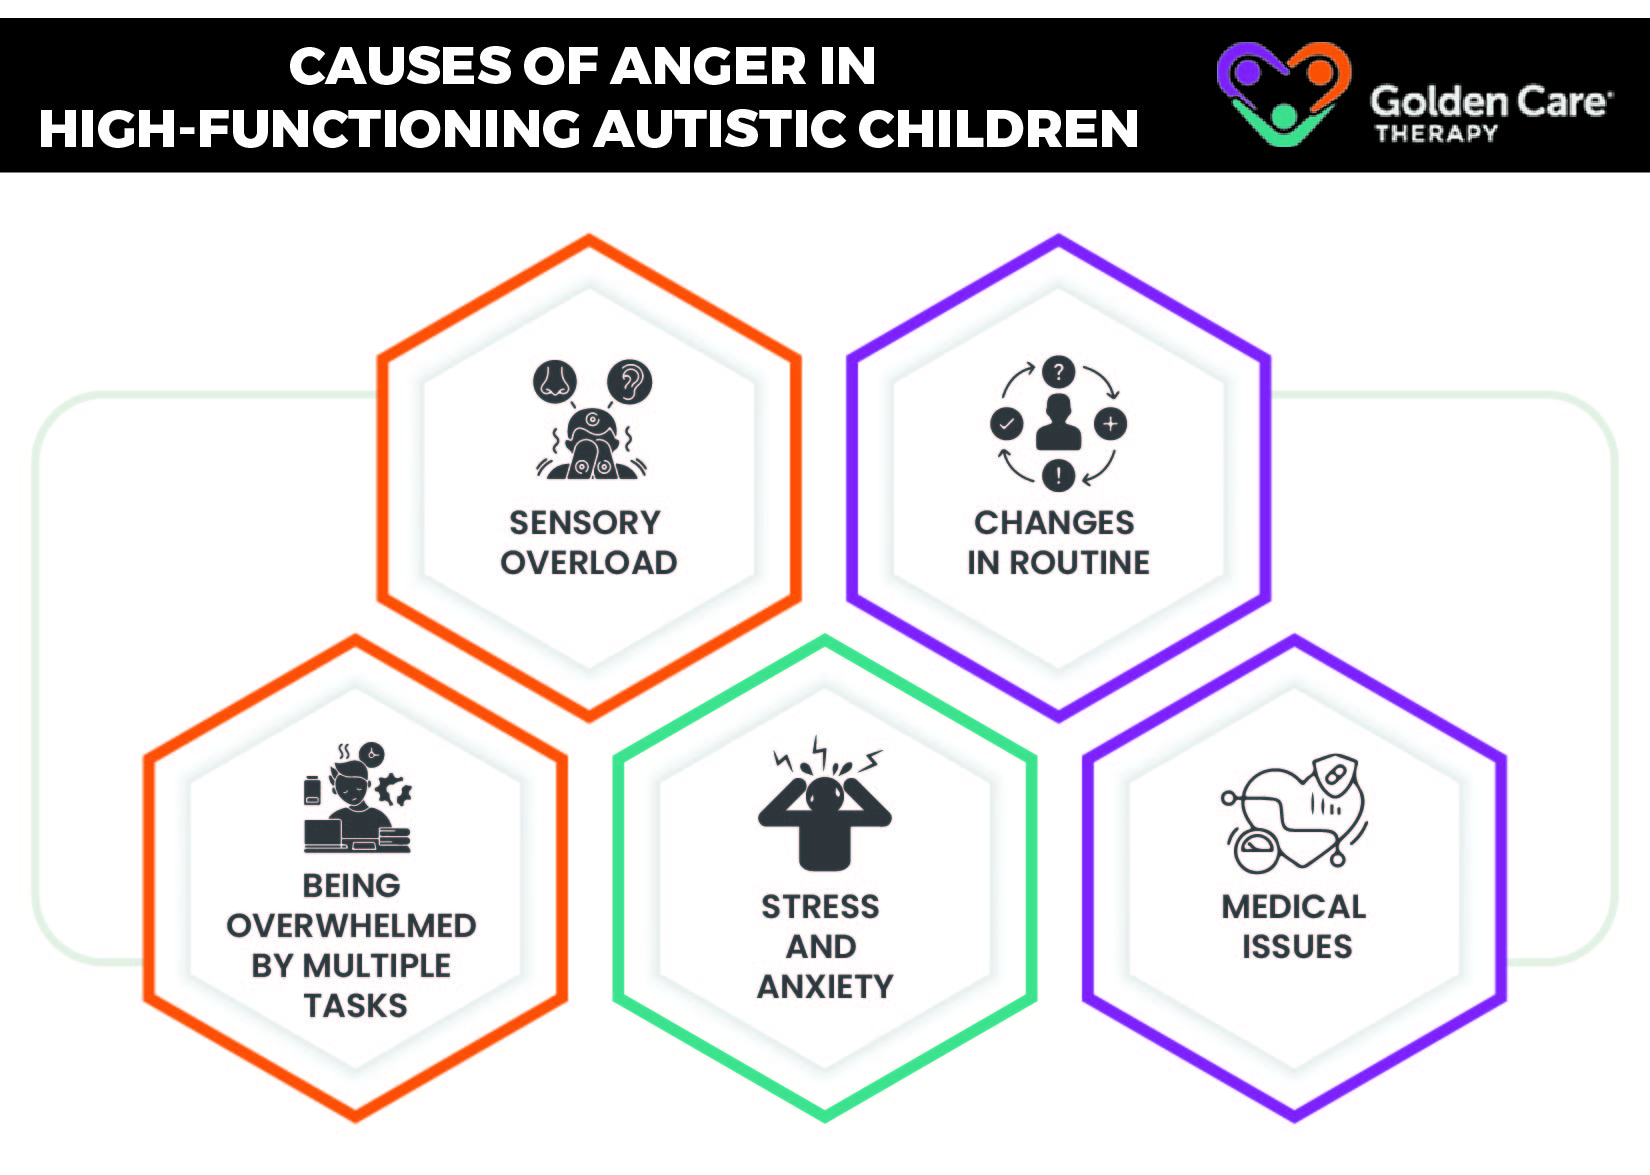 Causes of anger in HFA children